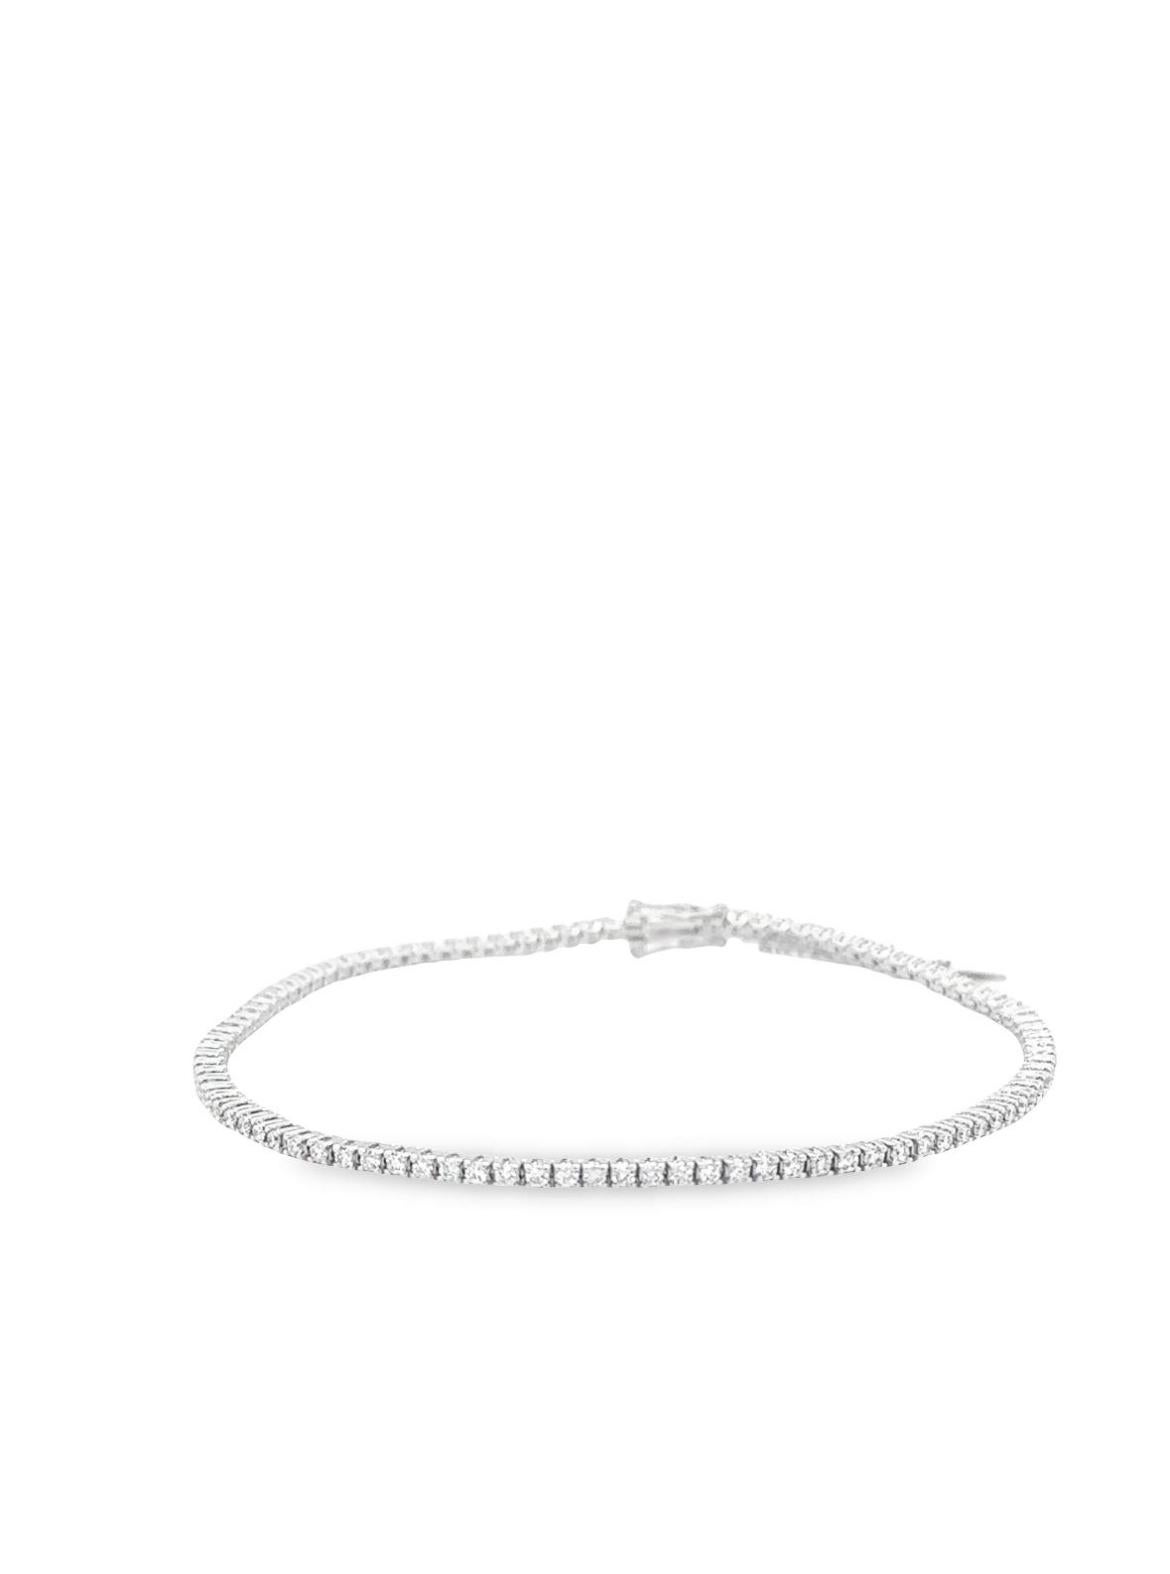 TIMELESS tennis Braclet. 18kt white Gold, 6.20gr with diamonds G color VS clarity in total 6.25ct.

The design of the bracelet is a harmonious blend of classic and contemporary elements, featuring carefully articulated links that offer flexibility